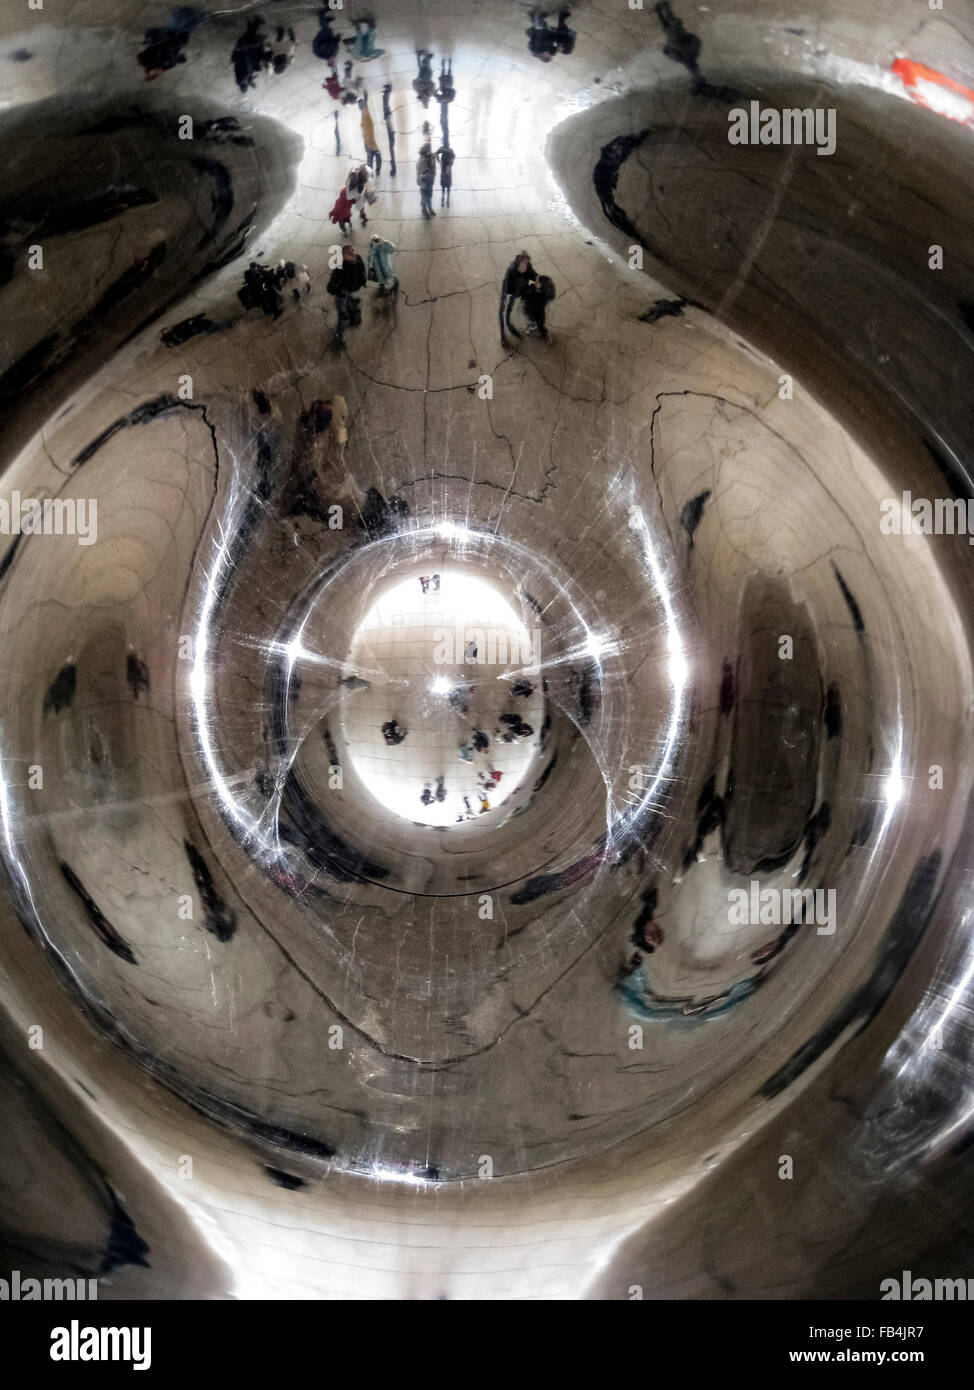 Distorted reflections are seen of sightseers looking underneath at 'The Bean,' the popular nickname for 'Cloud Gate,' a 110-ton elliptical sculpture in Millennium Park in Chicago, Illinois, USA. British artist Anish Kapoor created the shiny monument with pieces of stainless steel that were welded together and then highly polished to visually eliminate all the seams. The artwork took two years to complete and was unveiled in 2006. It has since become one of the major tourist attractions in the Windy City. Stock Photo